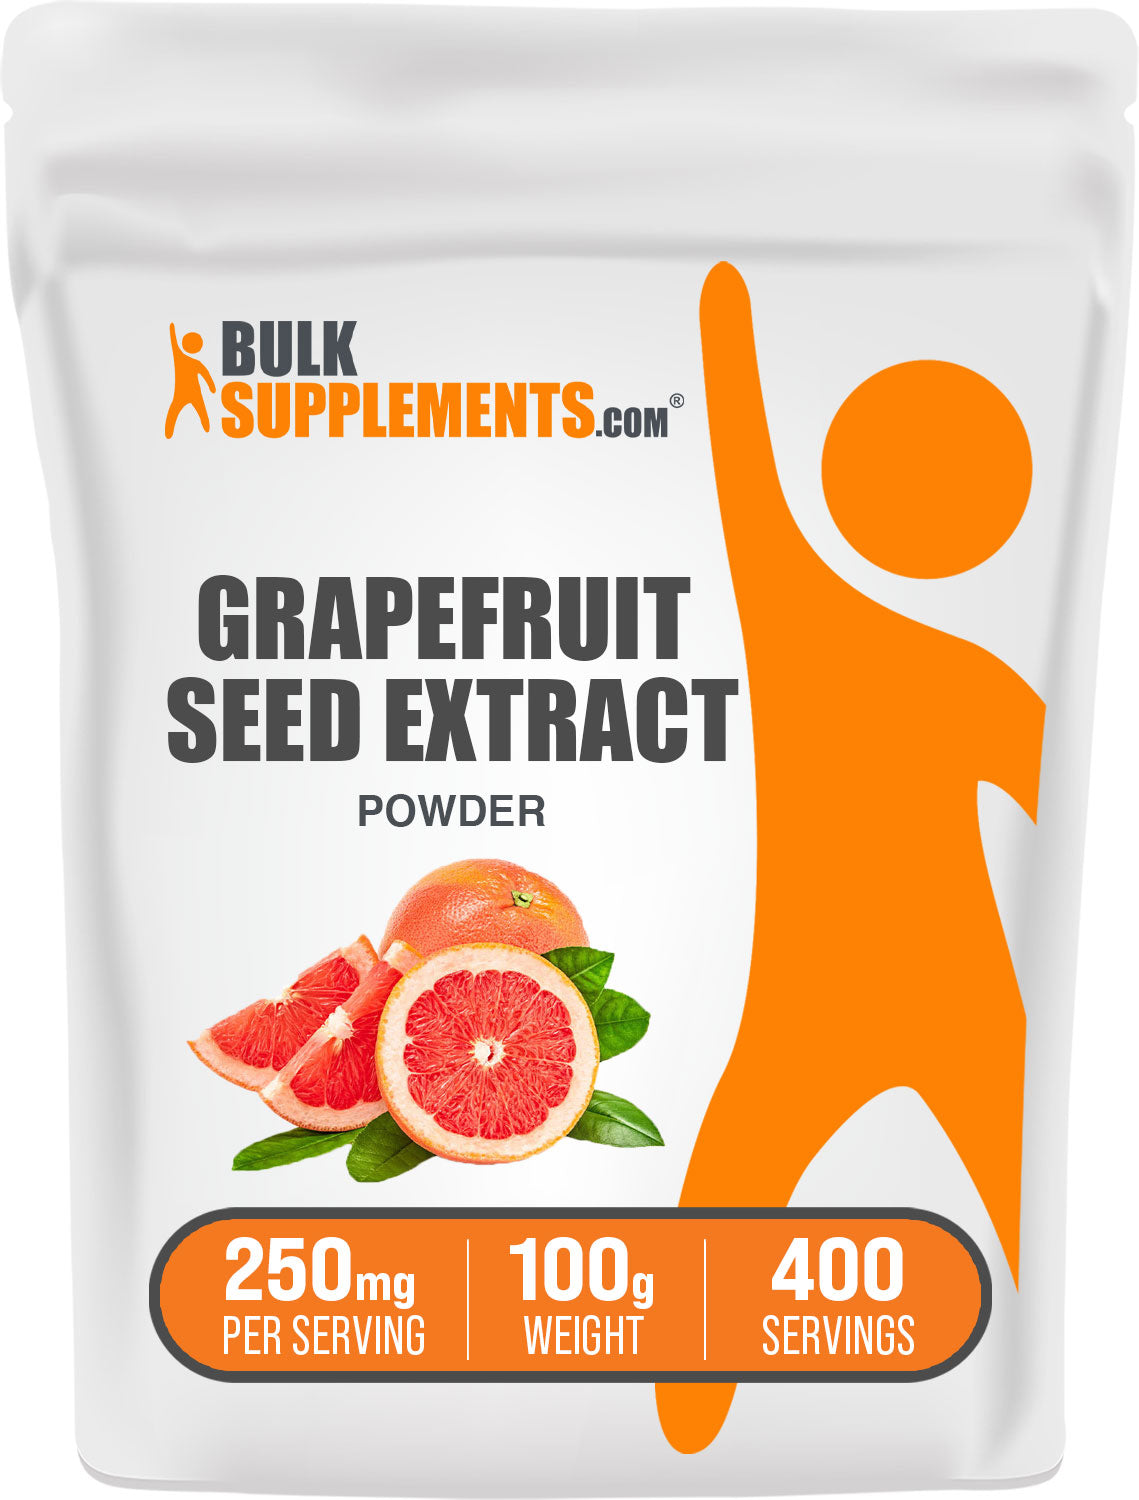 Grapefruit Seed Extract 100g